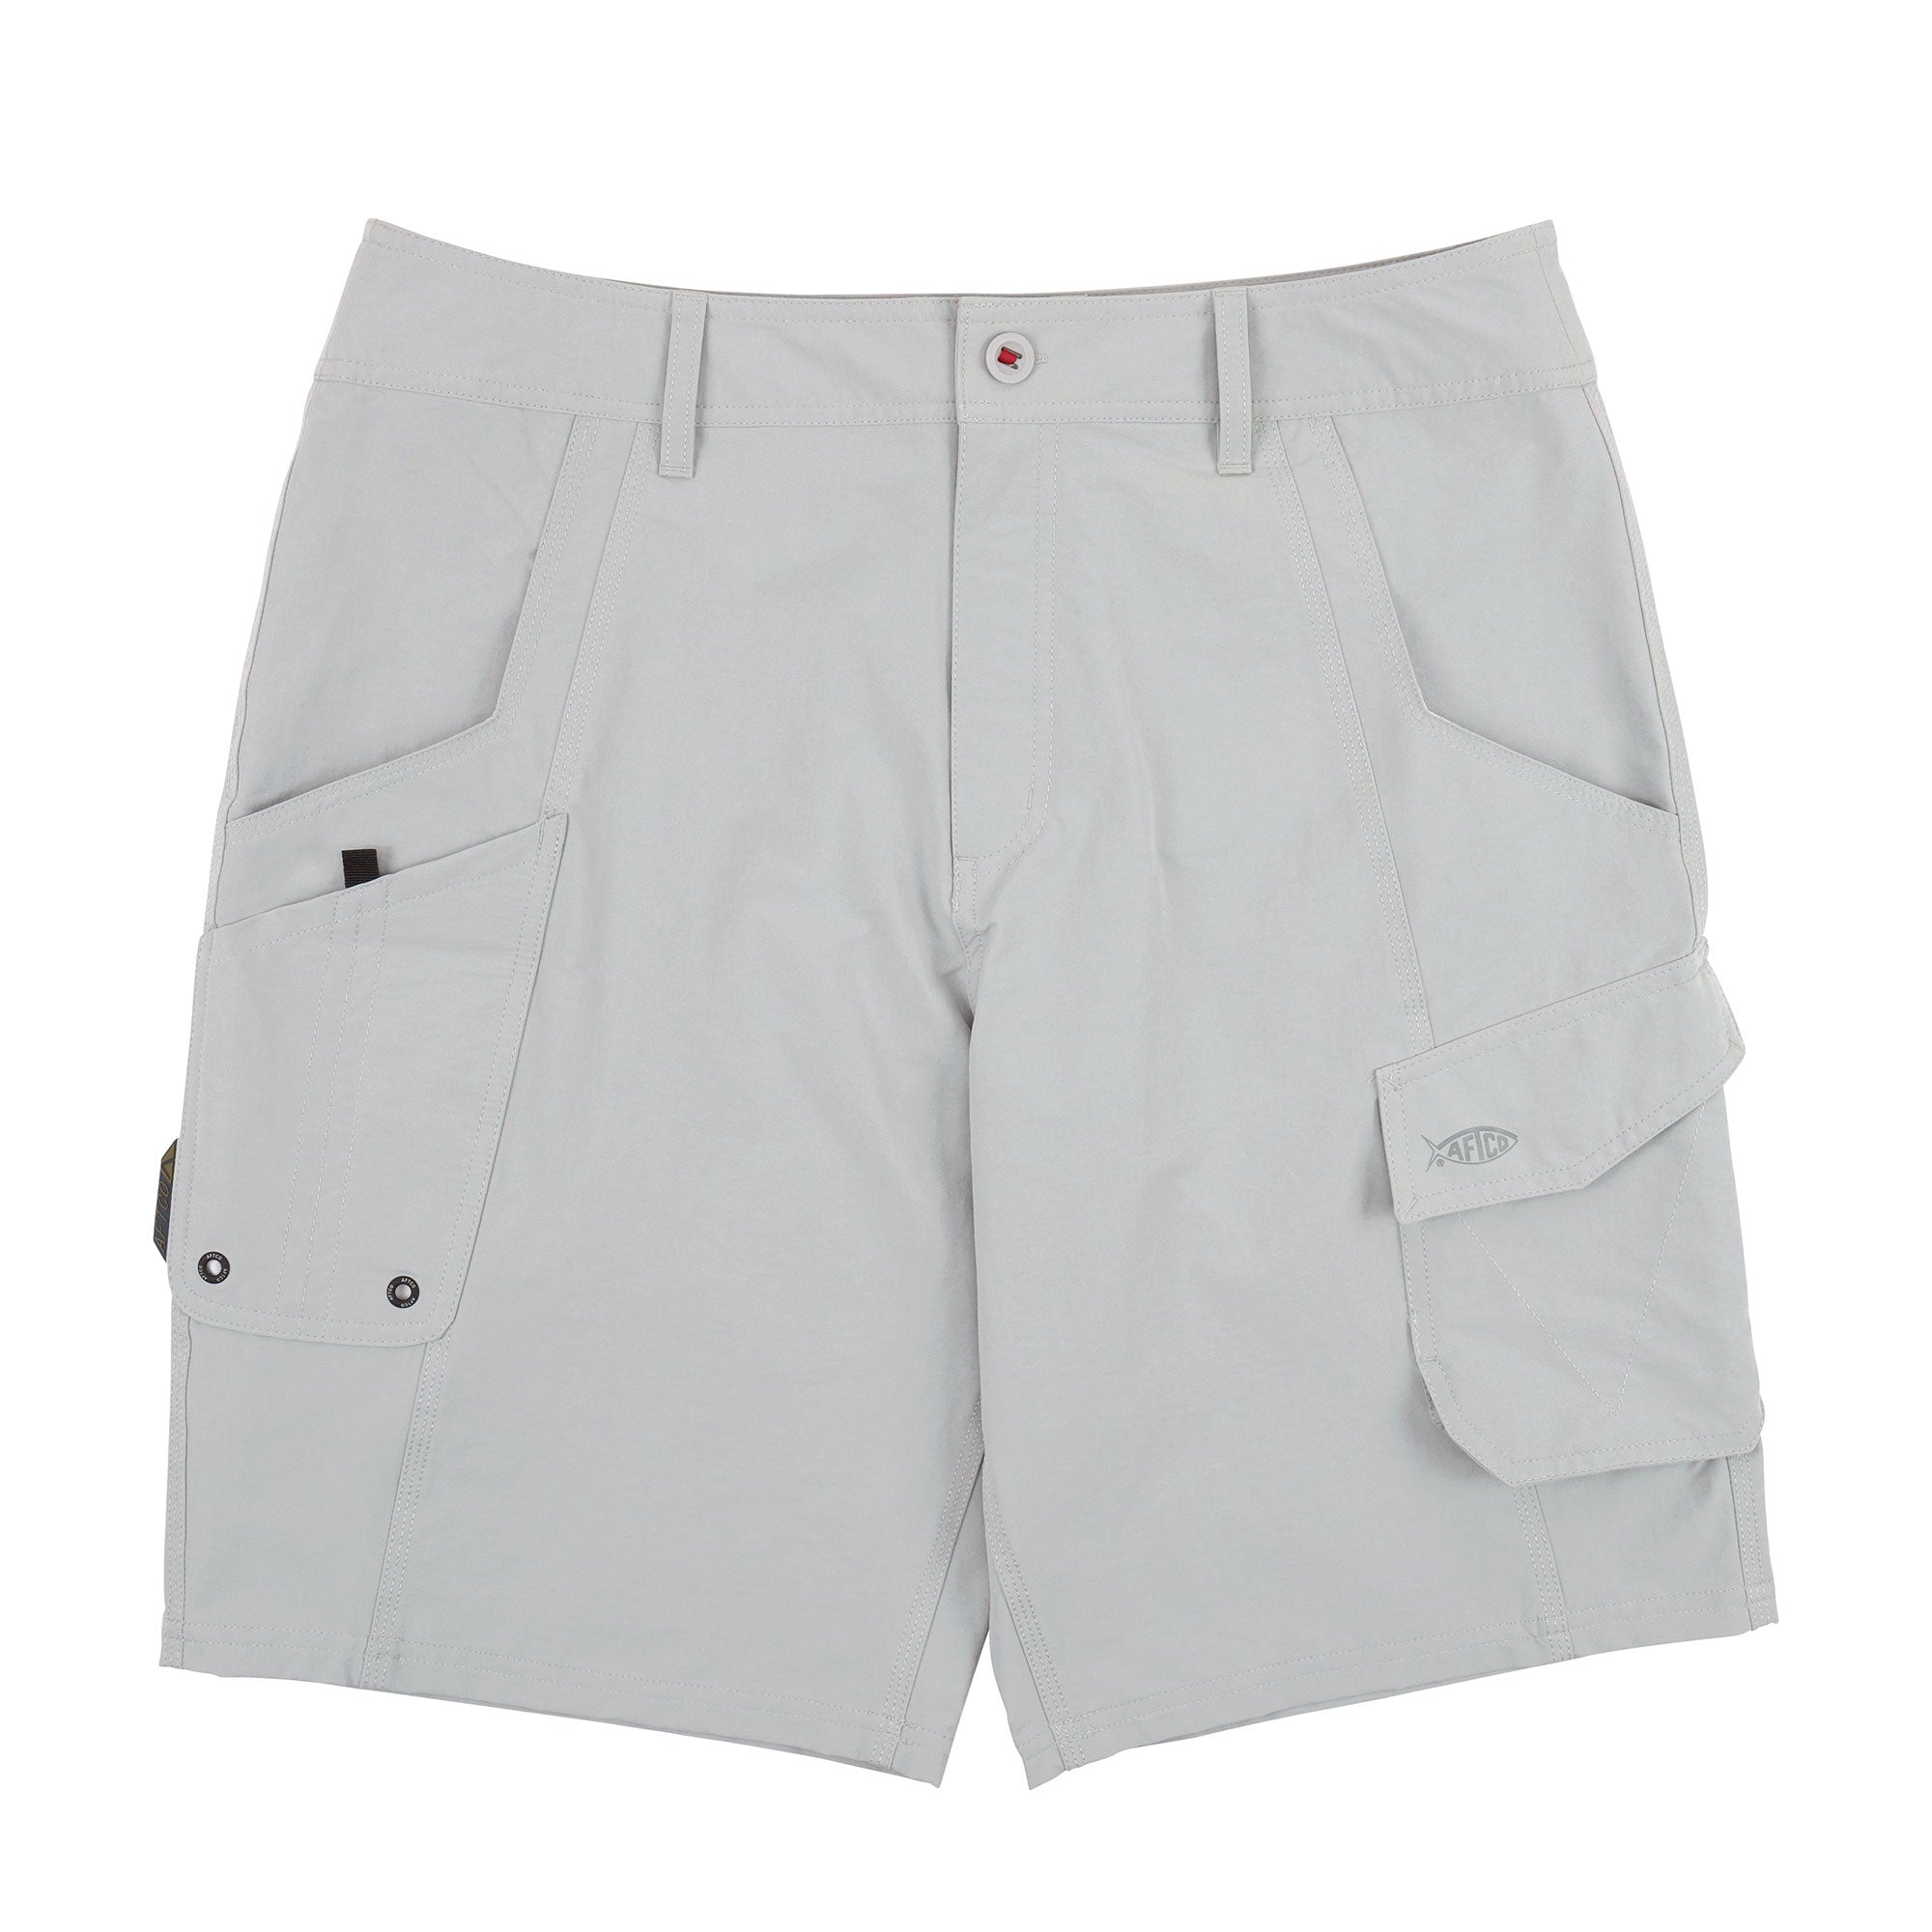 AFTCO Stealth Fishing Shorts - Light Gray - 32